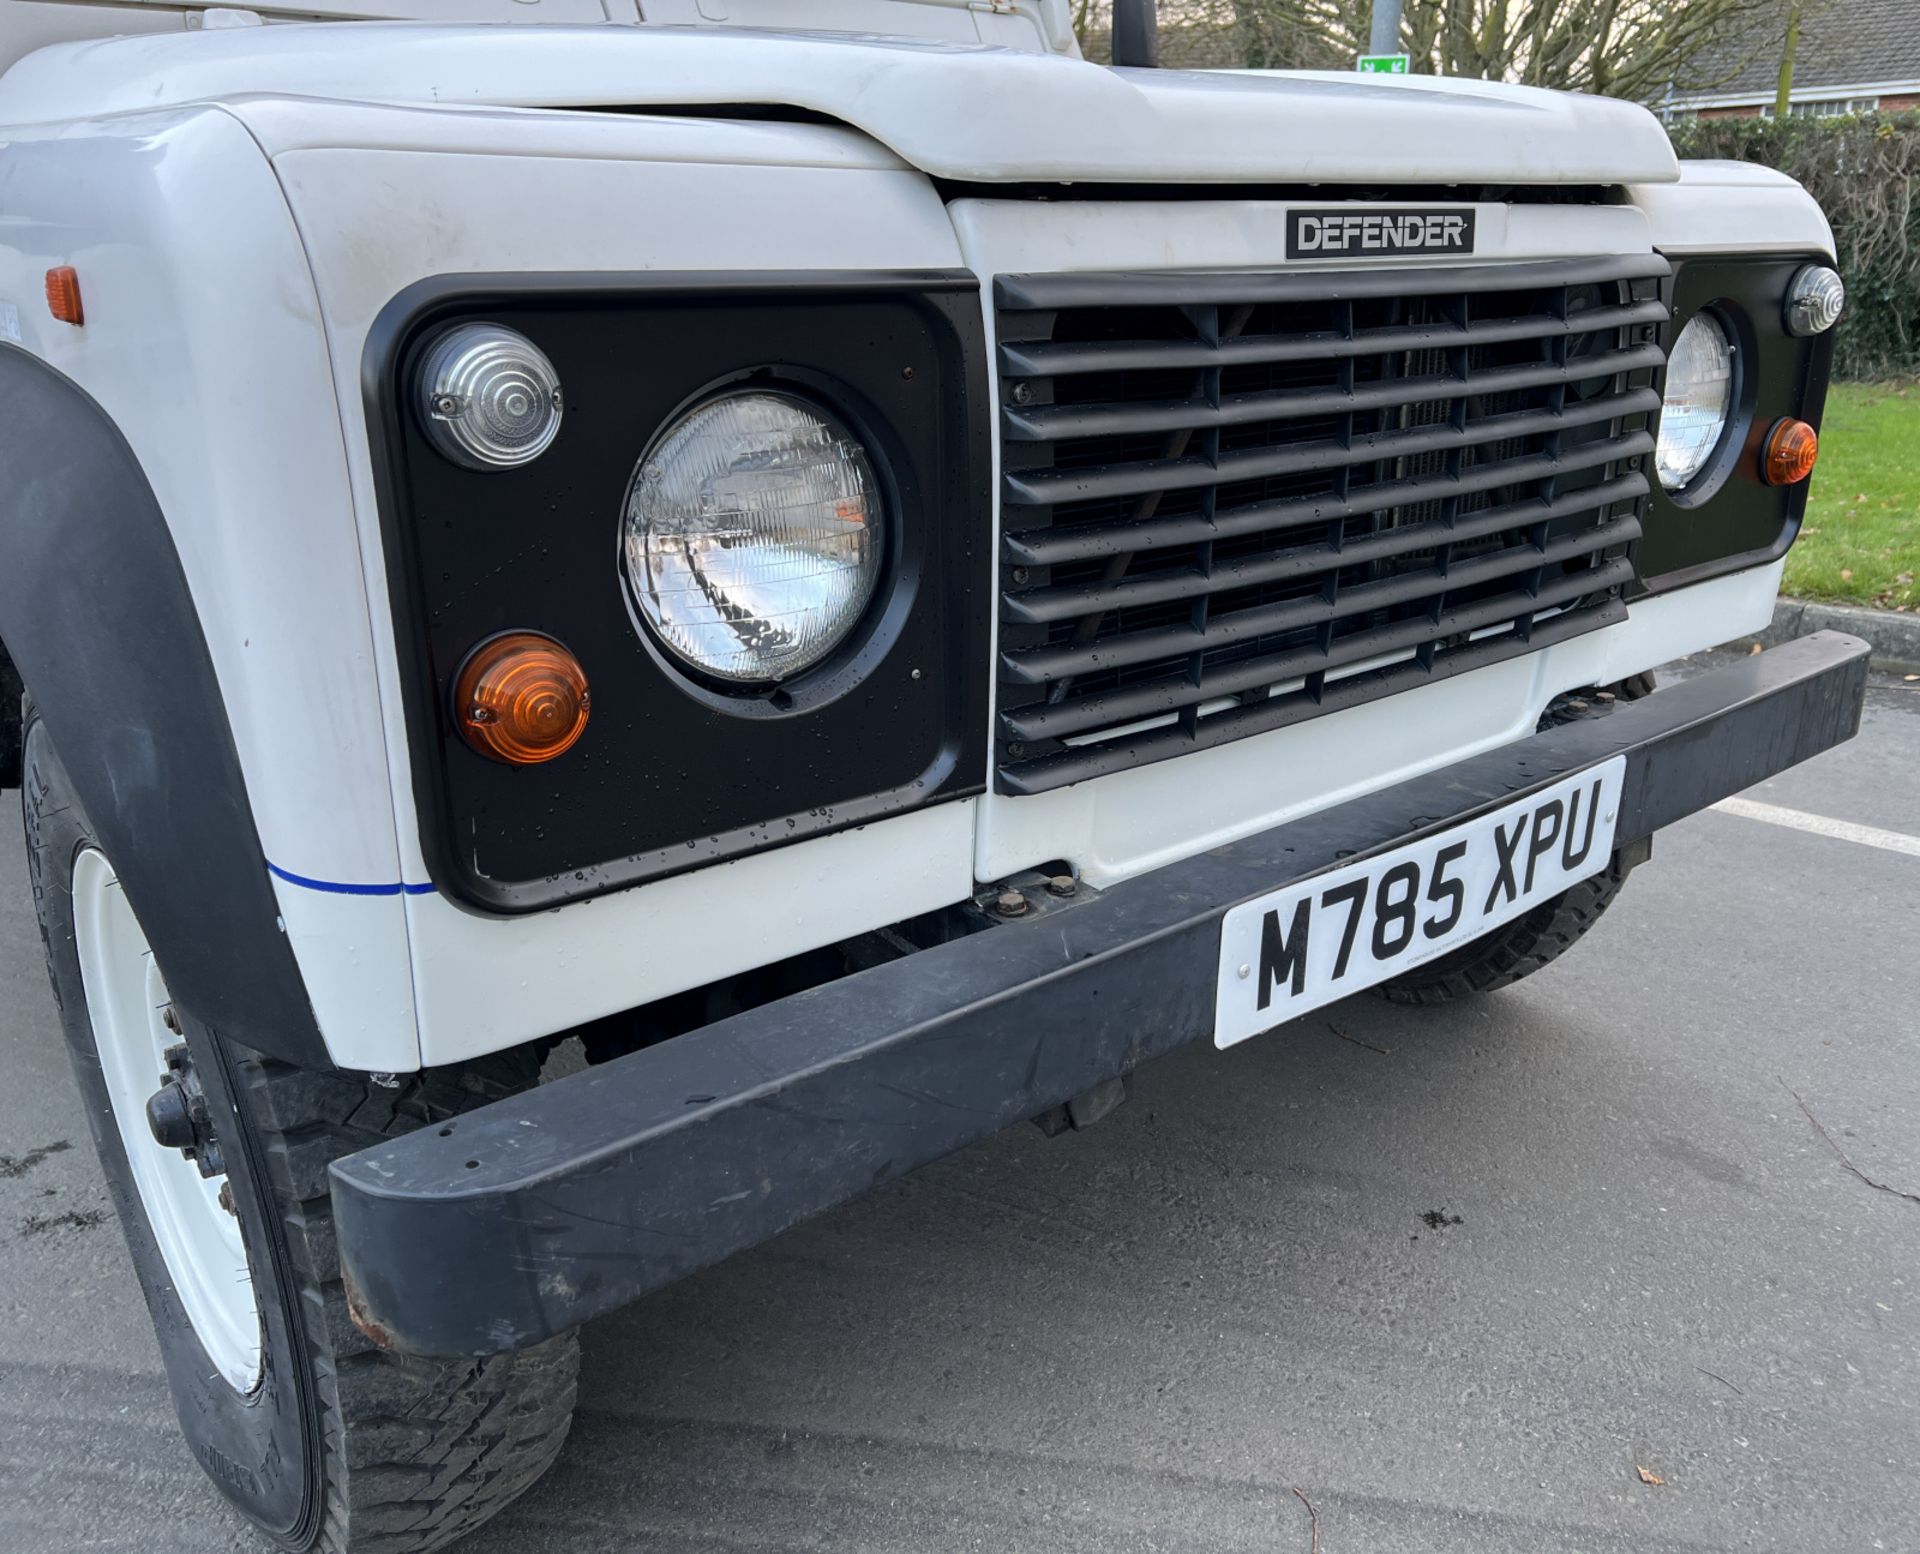 Land Rover Defender 110TDI - 1995 - Very low mileage at 24095 miles - 2.5L diesel - white - Image 37 of 49